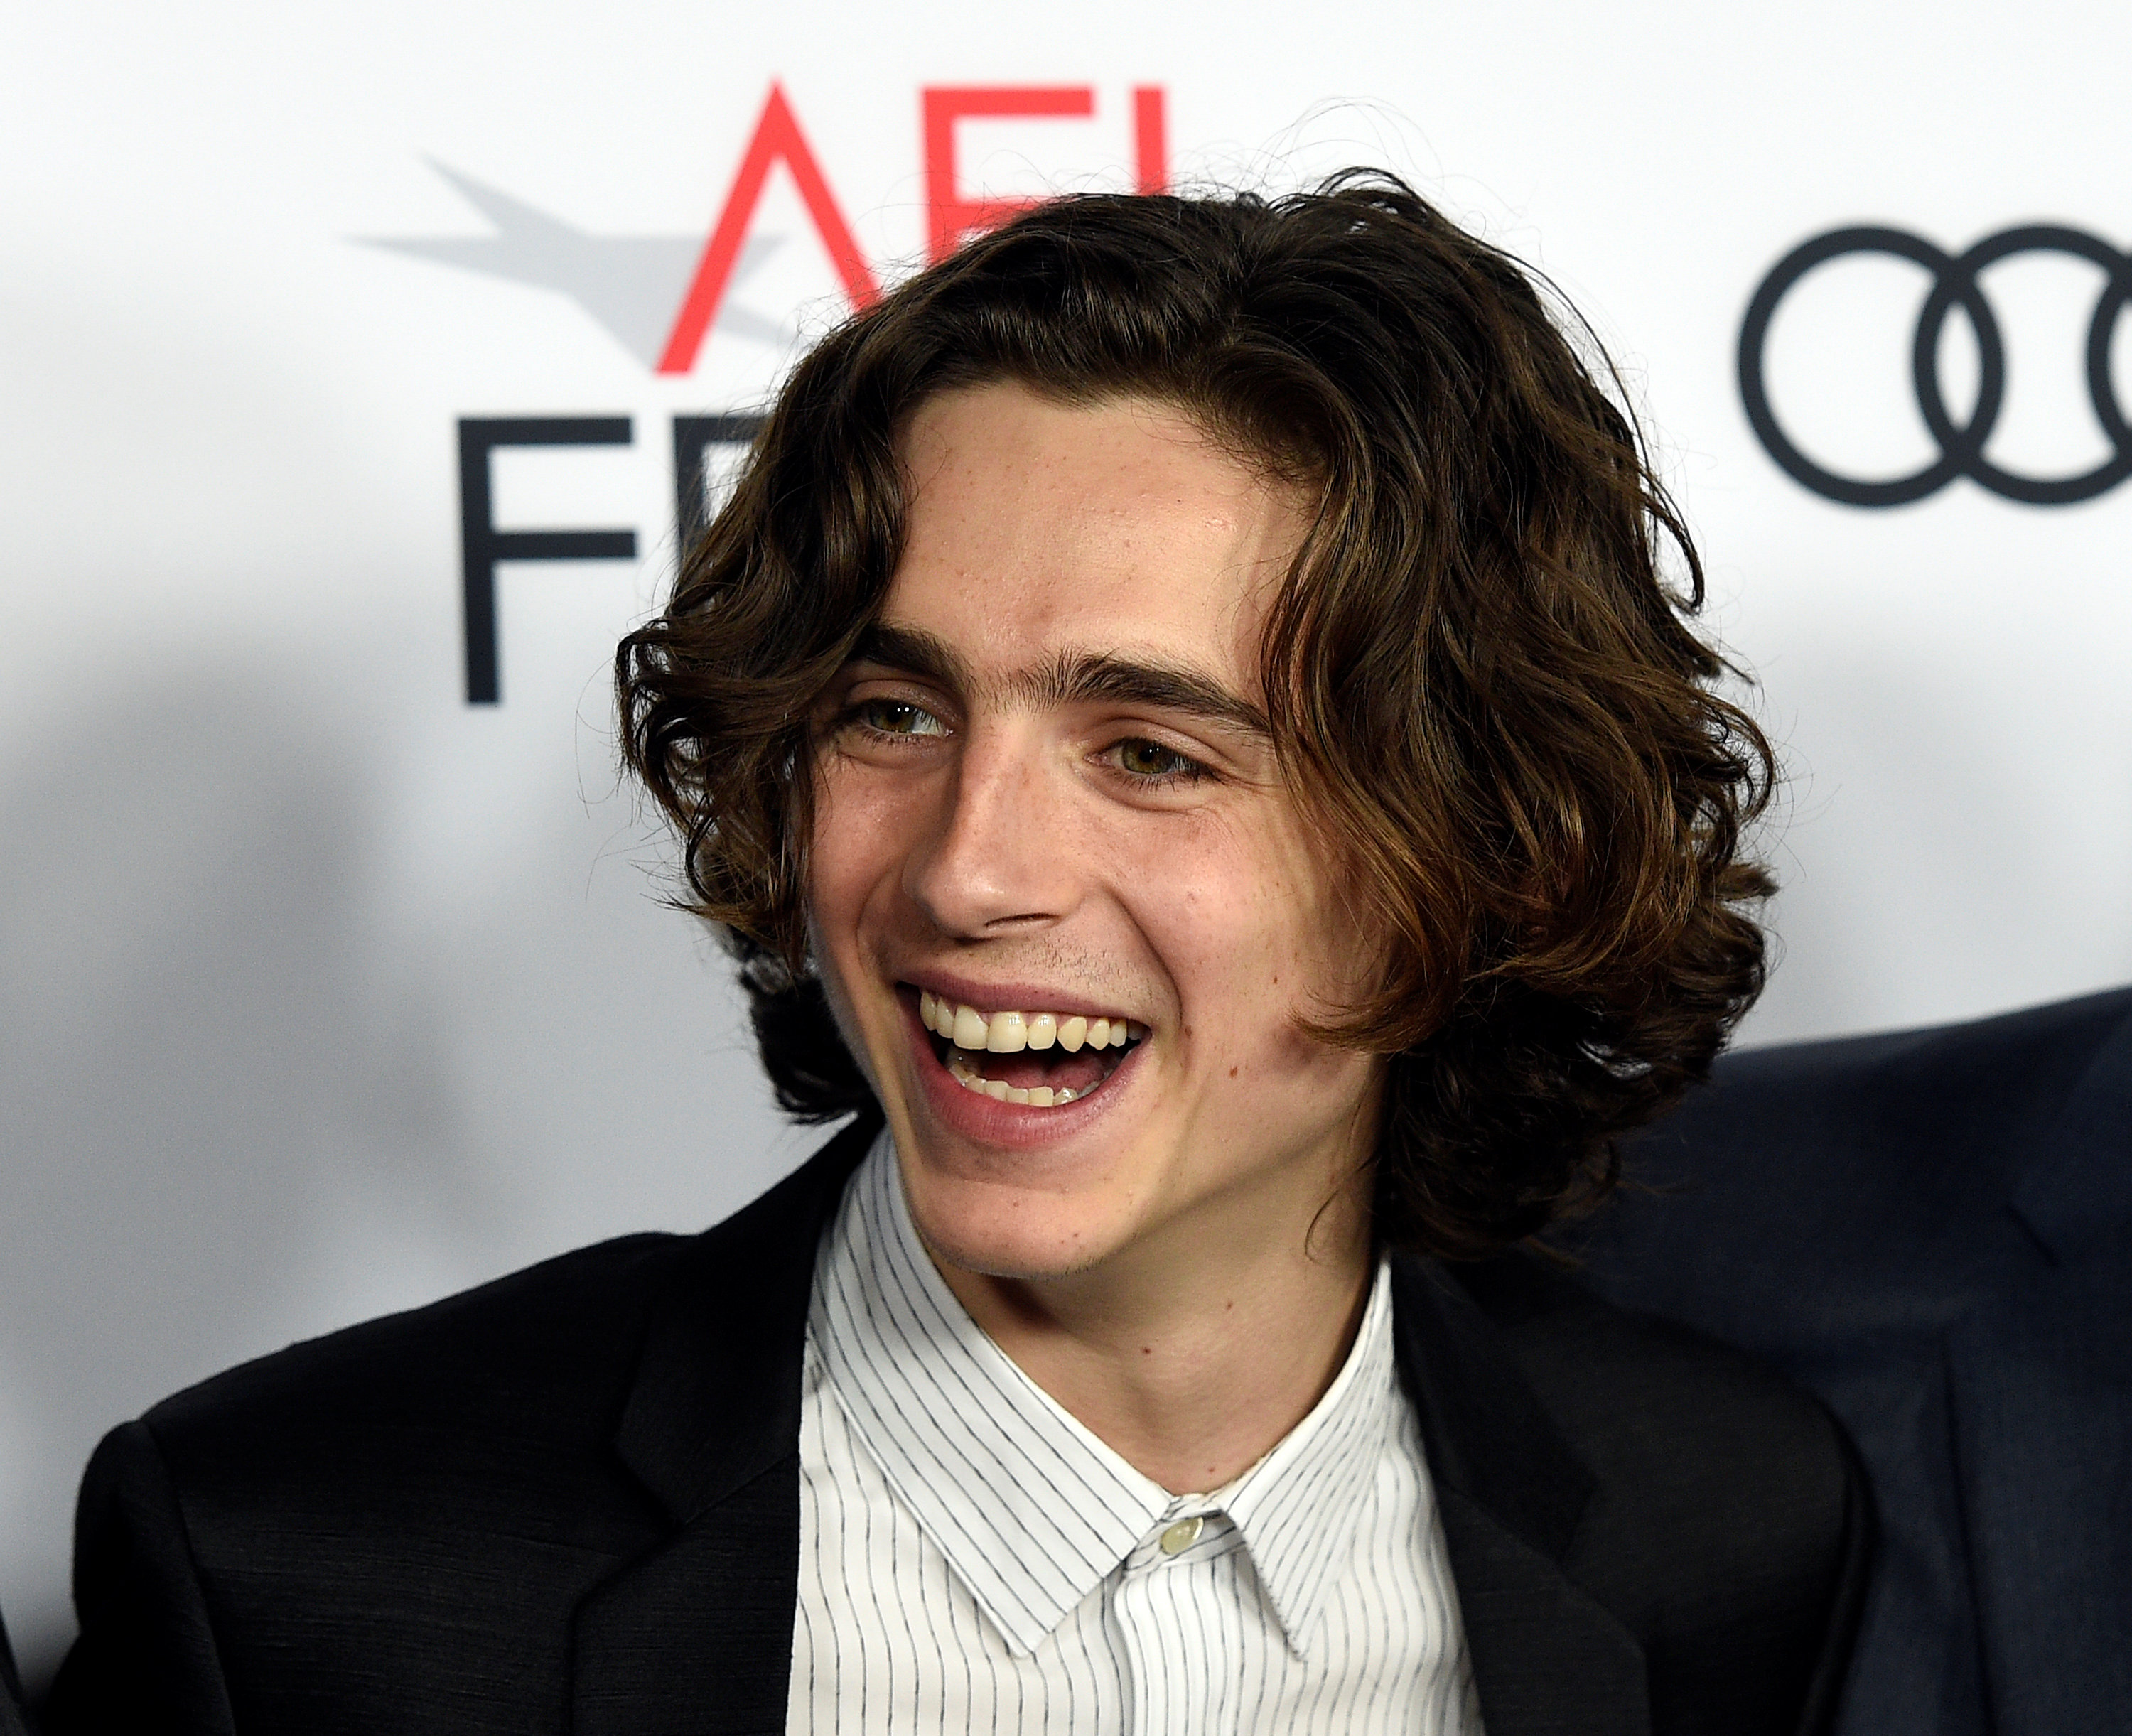 Cast member Timothee Chalamet attends the premiere of 'Call Me By Your Name' during AFI Fest 2017 in Los Angeles November 10, 2017. u00e2u20acu201d  Reuters pic